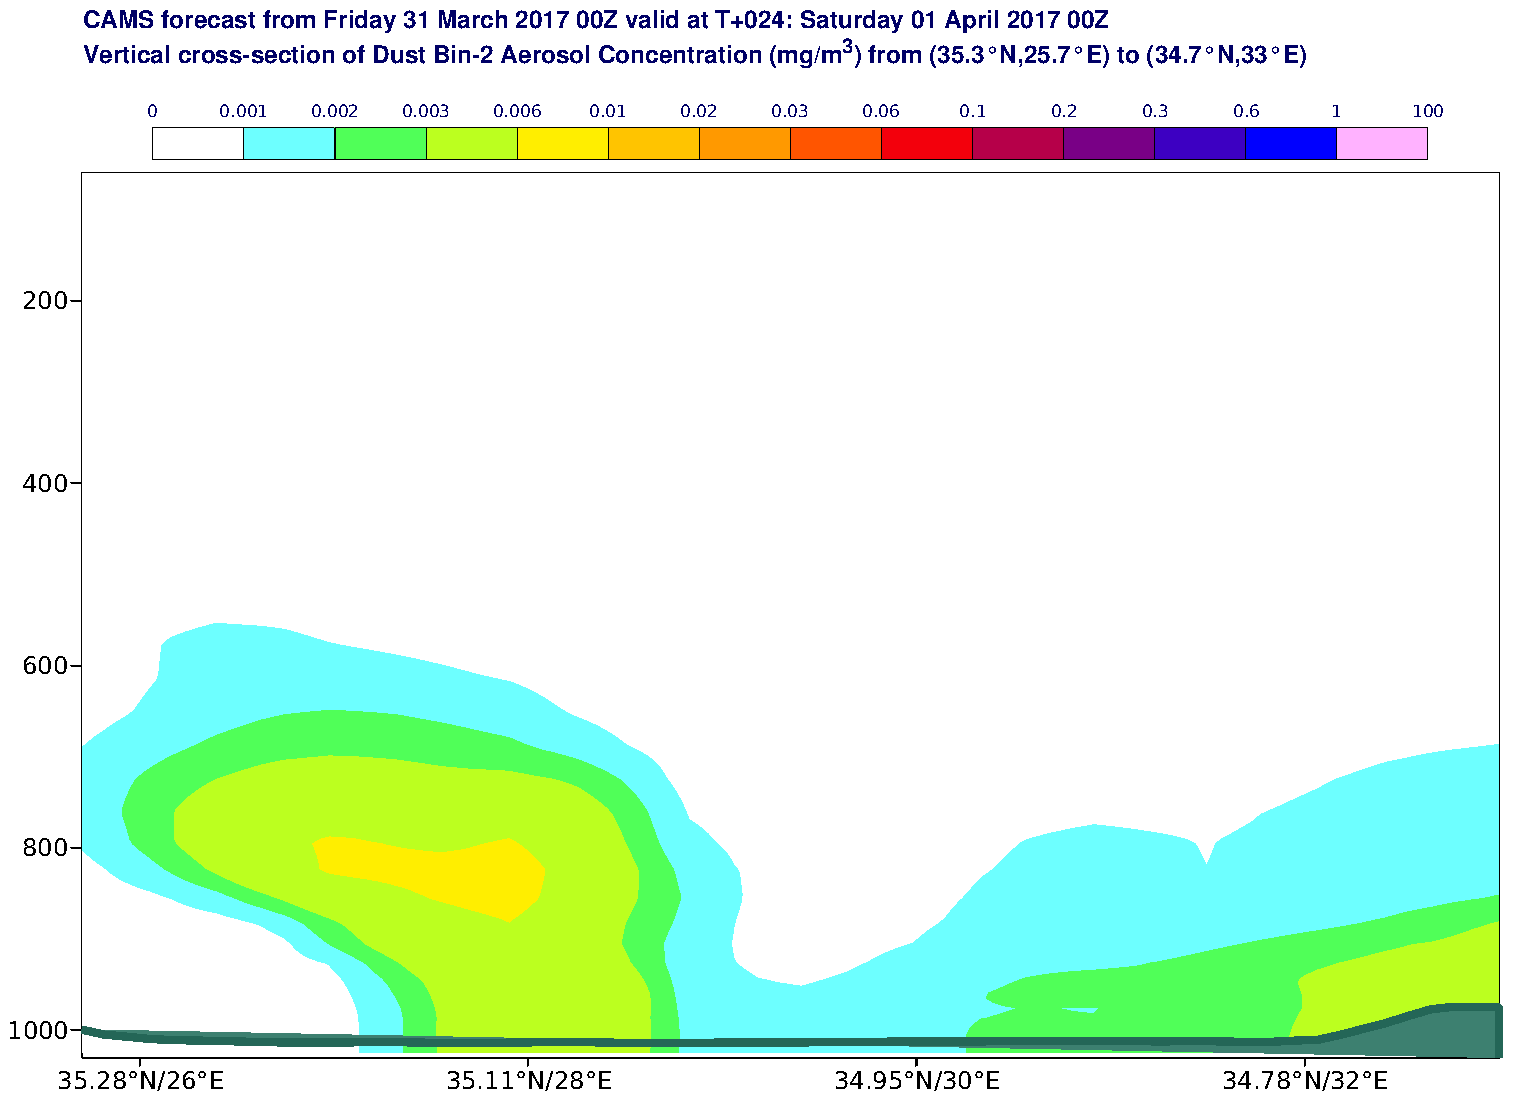 Vertical cross-section of Dust Bin-2 Aerosol Concentration (mg/m3) valid at T24 - 2017-04-01 00:00